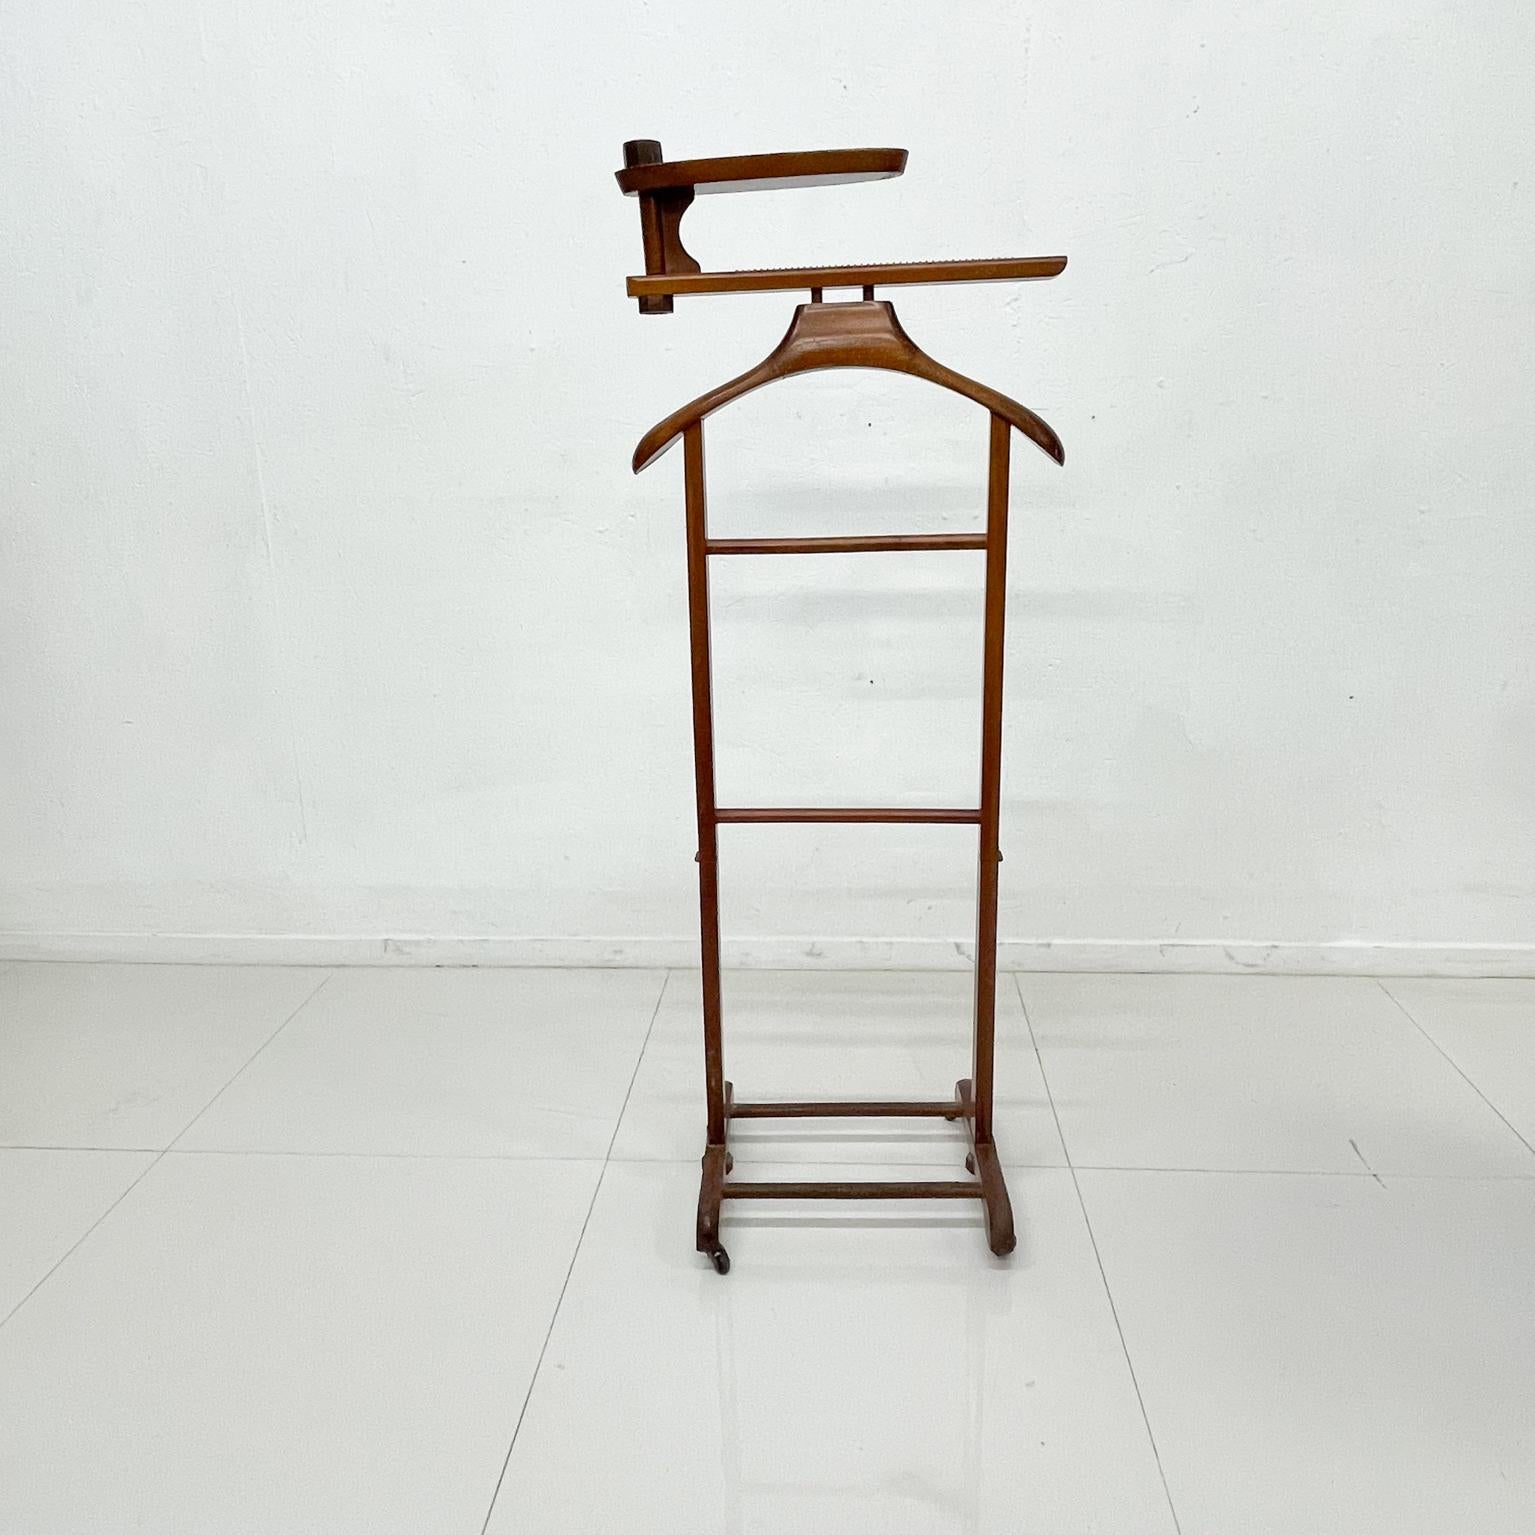 Italian Gentleman's Collapsible Wood Travel Valet Stand on Wheels 1950s Made in Italy